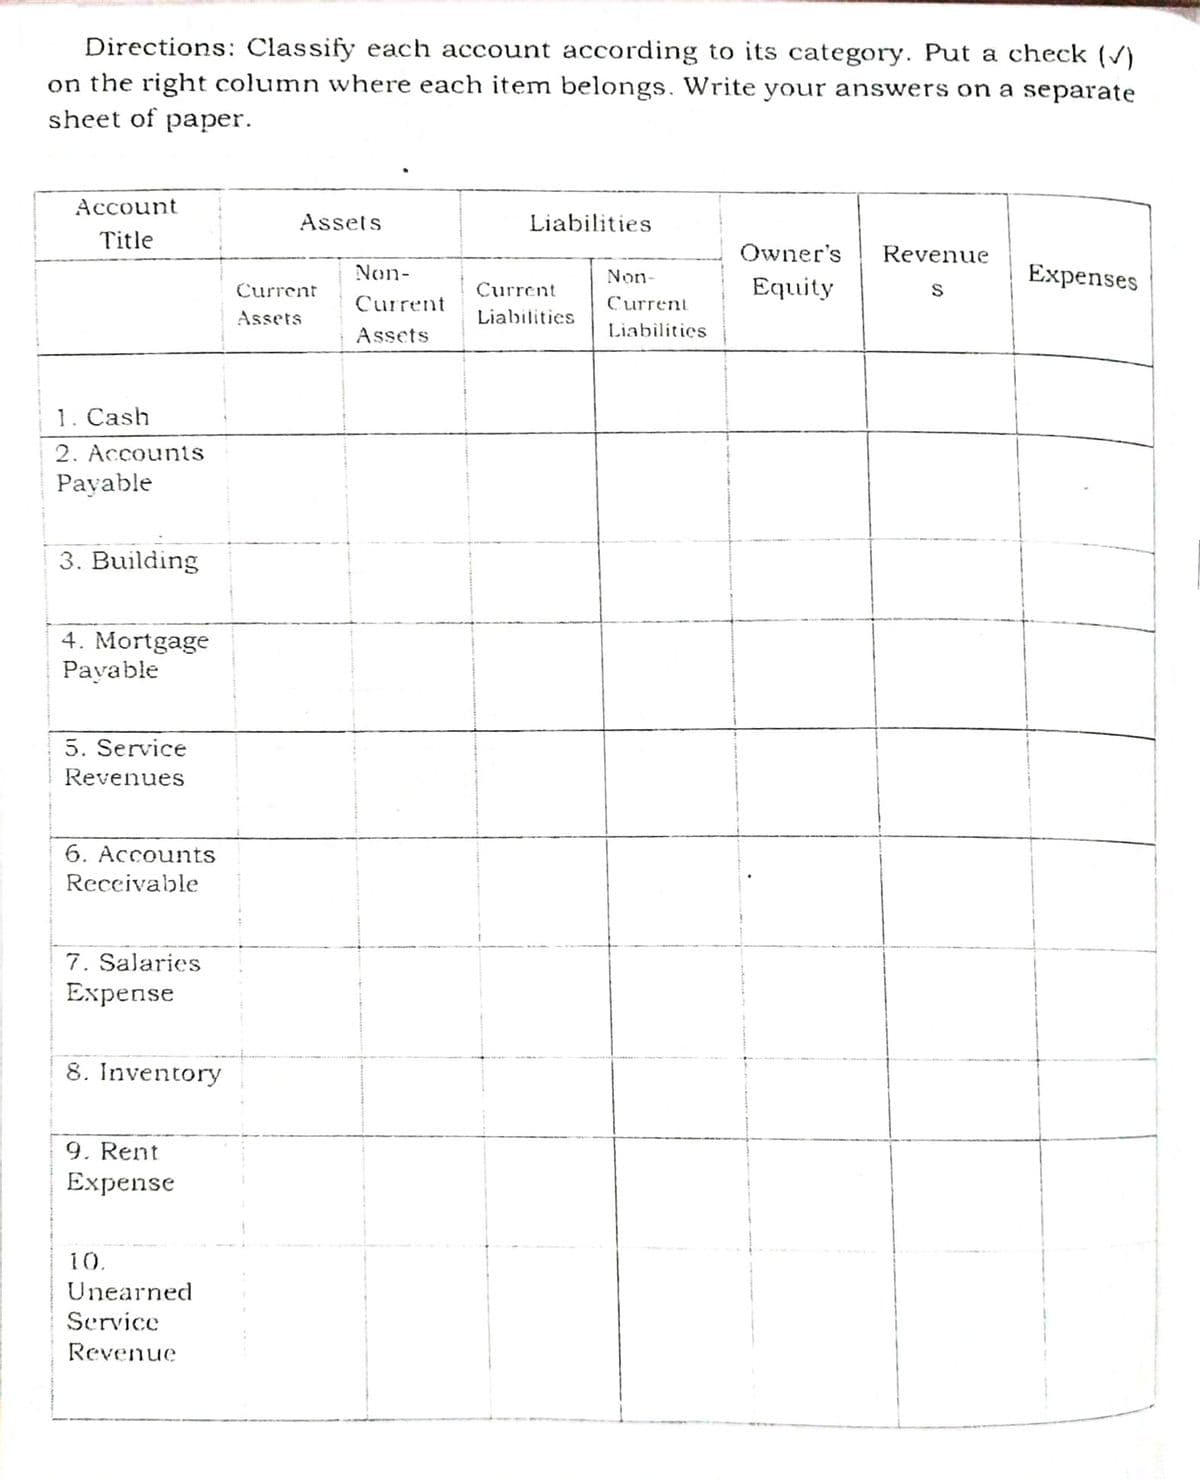 Directions: Classify each account according to its category. Put a check (V)
on the right column where each item belongs. Write your answers on a separate
sheet of paper.
Account
Assets
Liabilities
Title
Owner's
Revenue
Non-
Expenses
Non-
Current
Current
Equity
Current
Current
Assets
Liabilities
Assets
Liabilities
1. Cash
2. Accounts
Payable
3. Building
4. Mortgage
Payable
5. Service
Revenues
6. Accounts
Receivable
7. Salaries
Expense
8. Inventory
9. Rent
Expense
10.
Unearned
Service
Revenue
